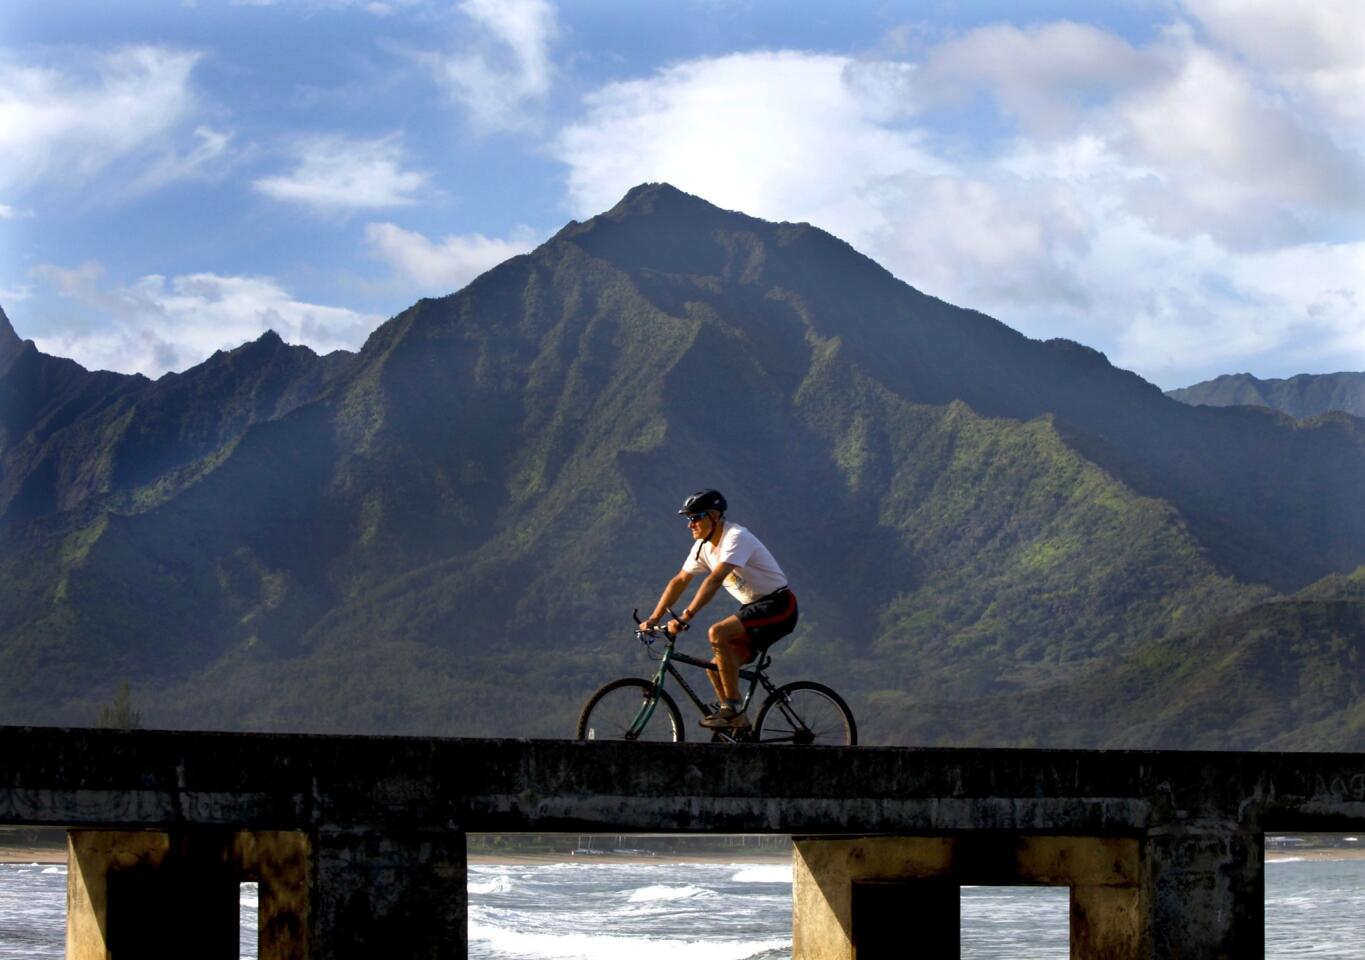 A bicyclist on the pier